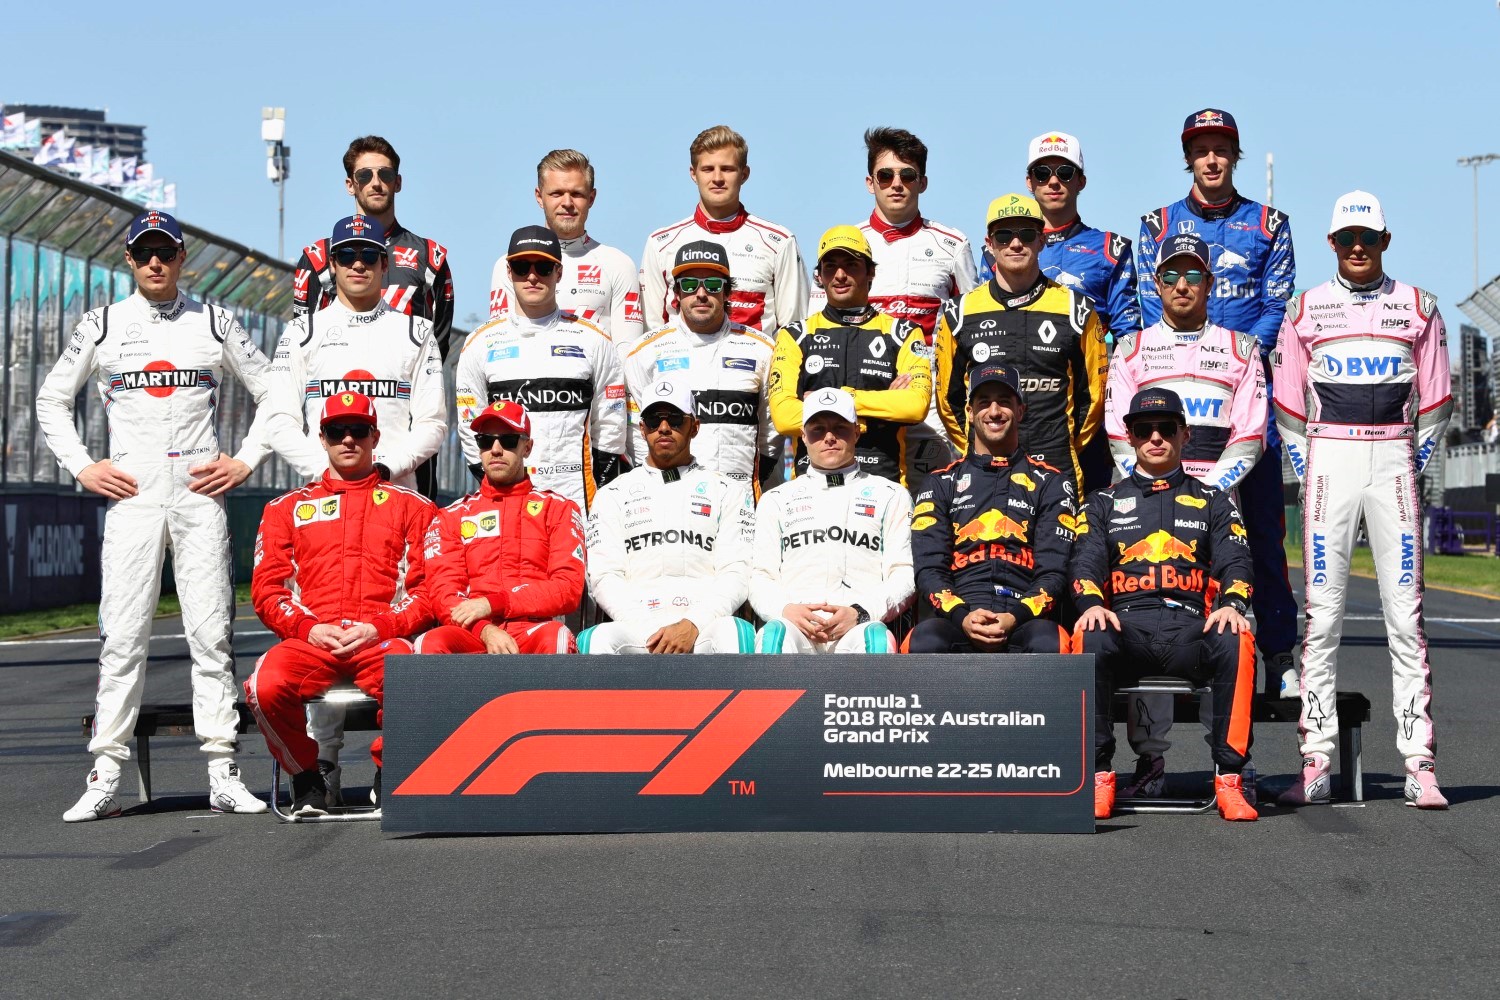 F1 will hold a special launch event with all the drivers in Melbourne